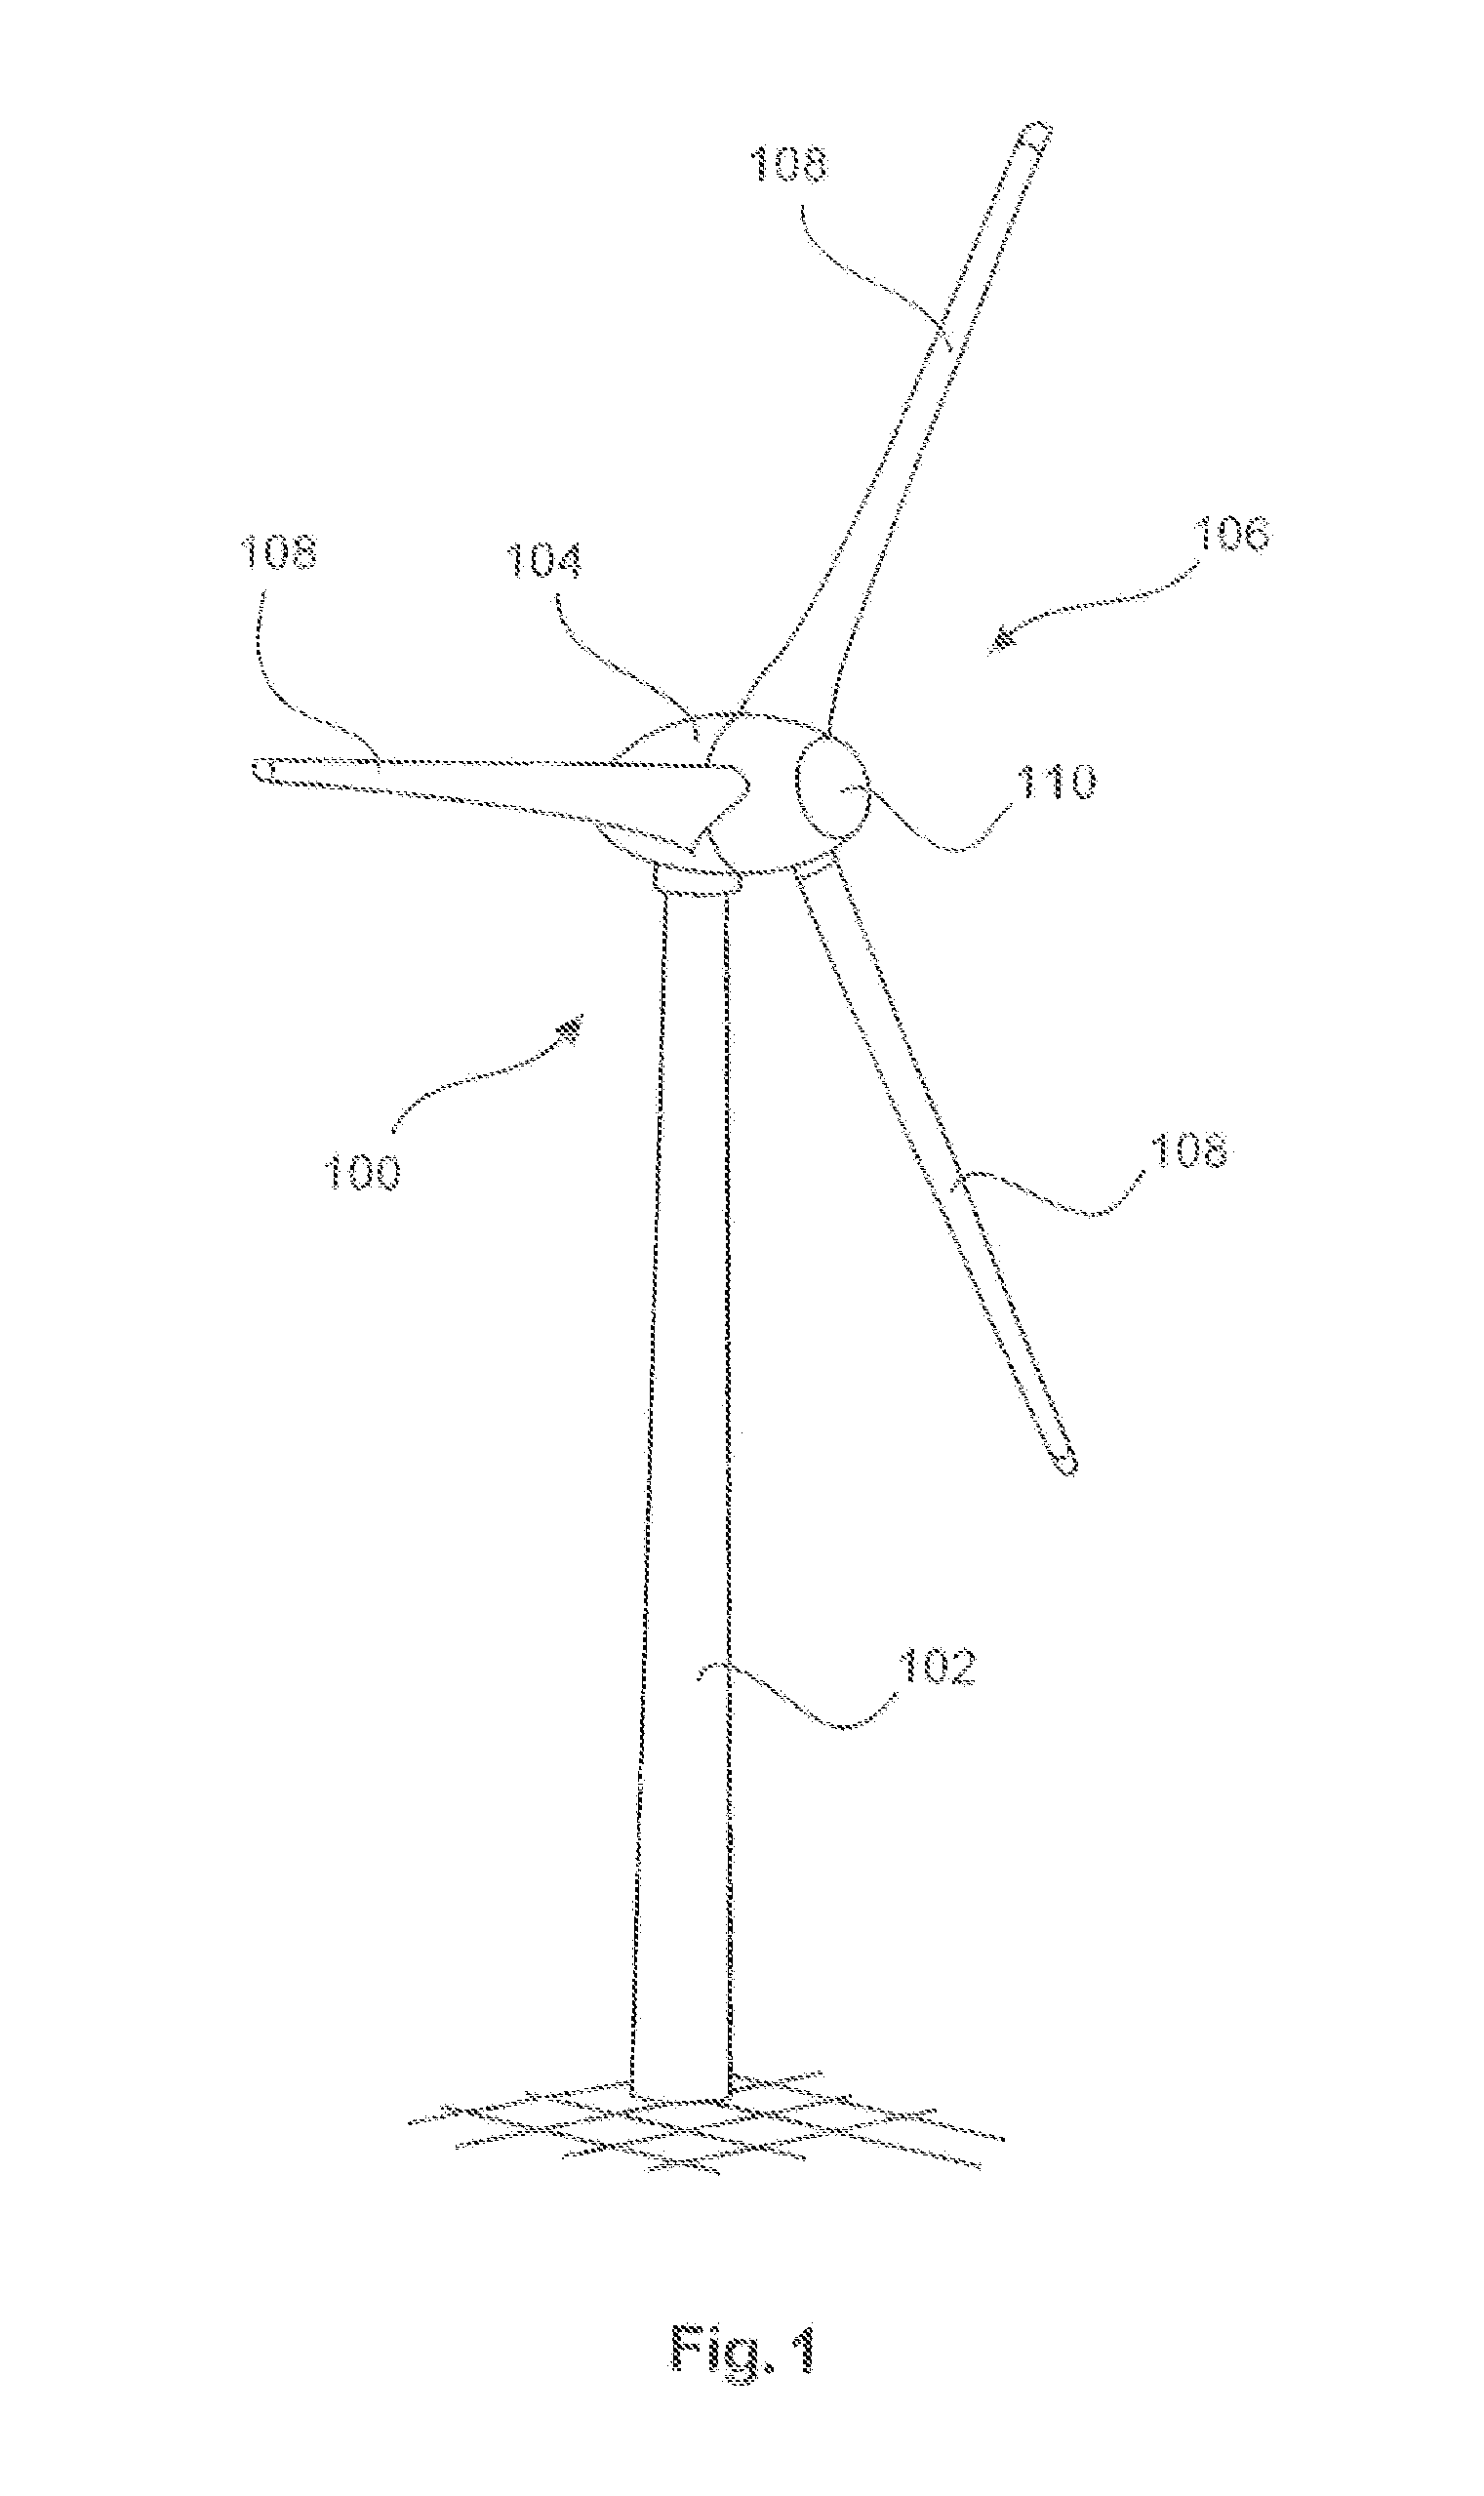 Synchronous generator of a gearless wind energy turbine